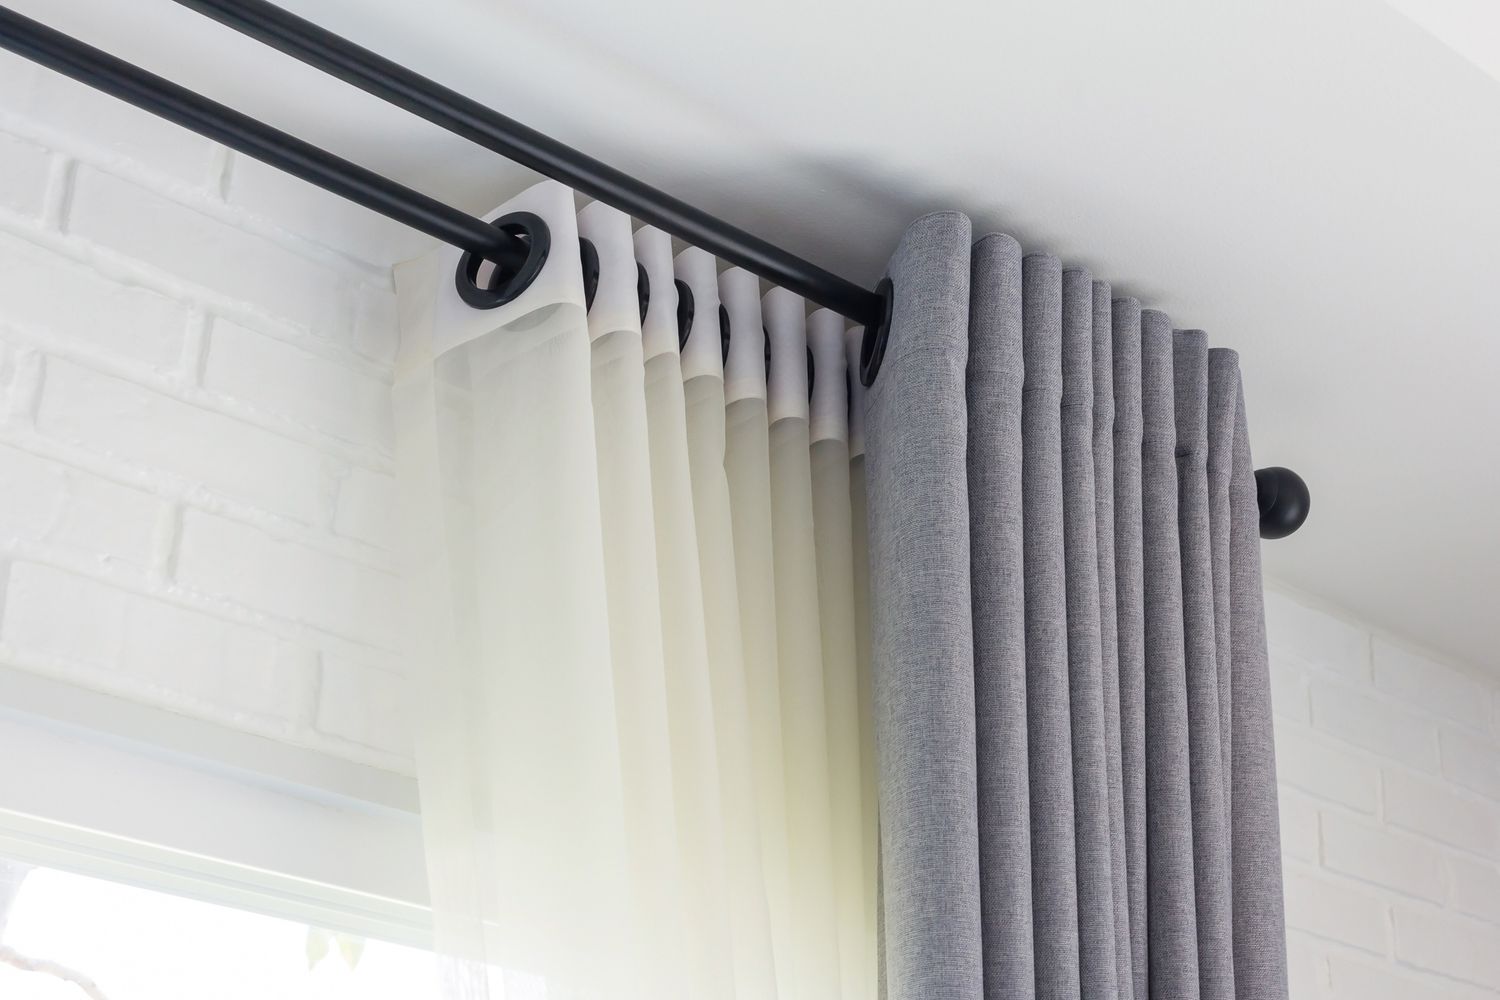 Curtain Rod Types And How To Choose The Right Ones